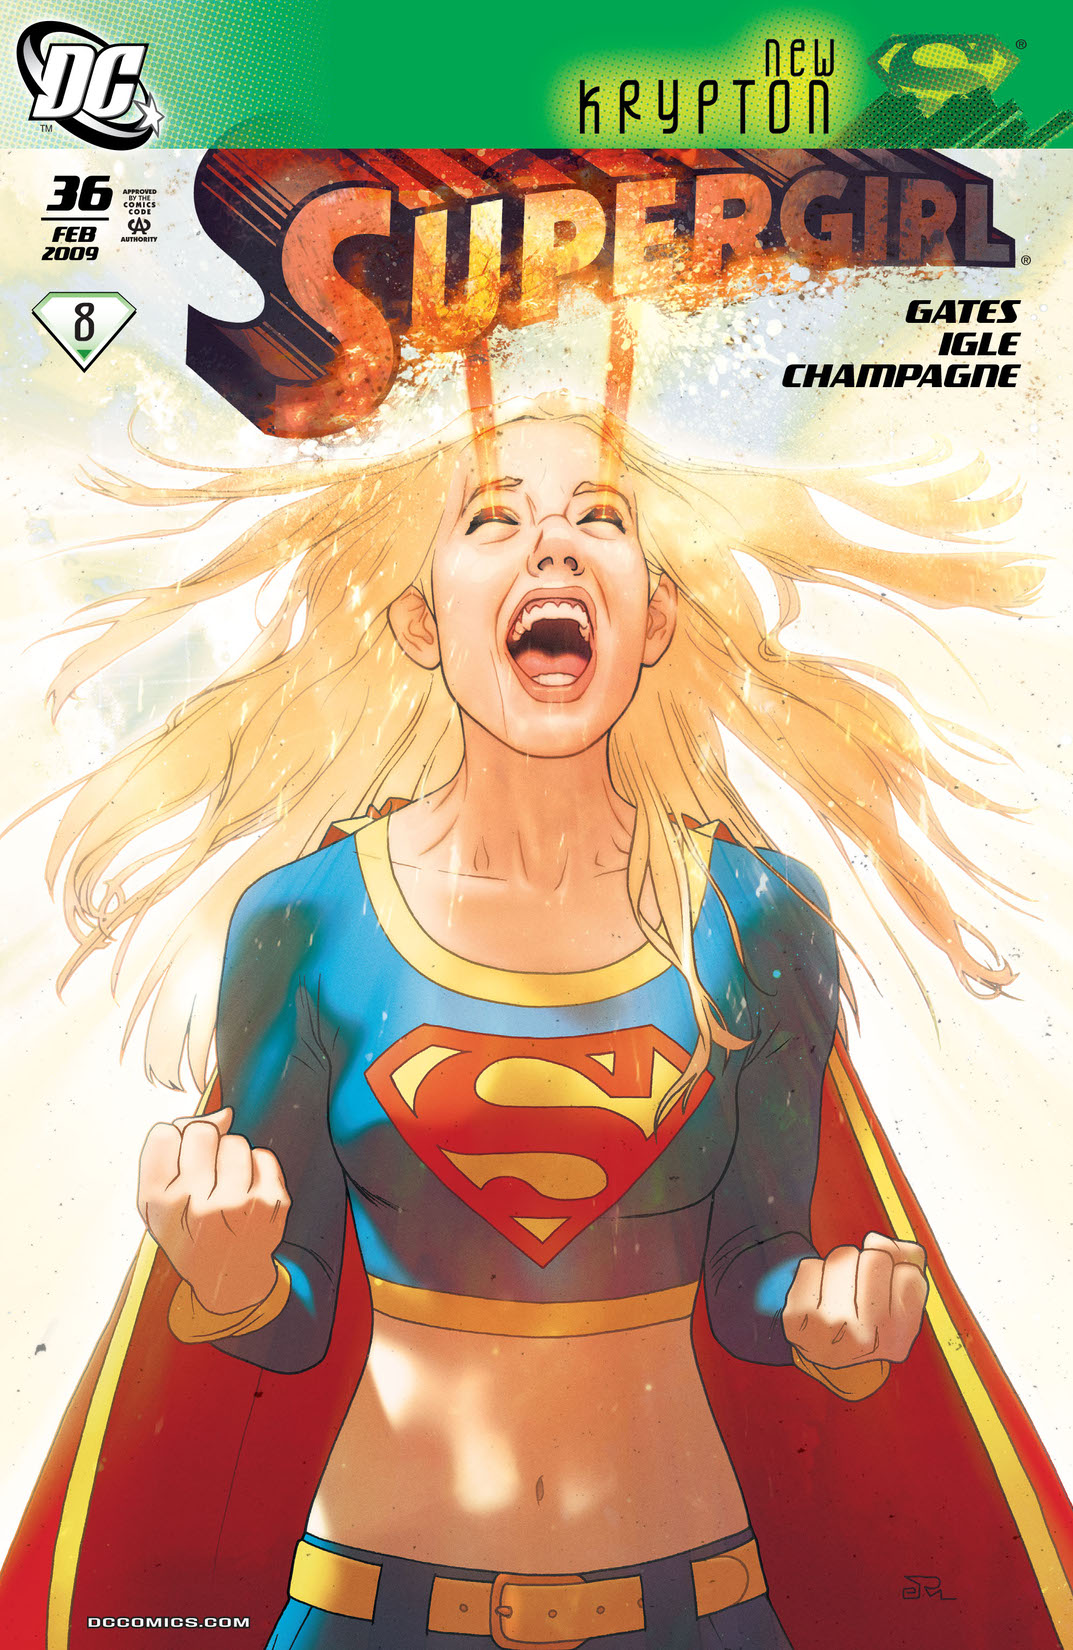 Supergirl (2005-) #36 preview images